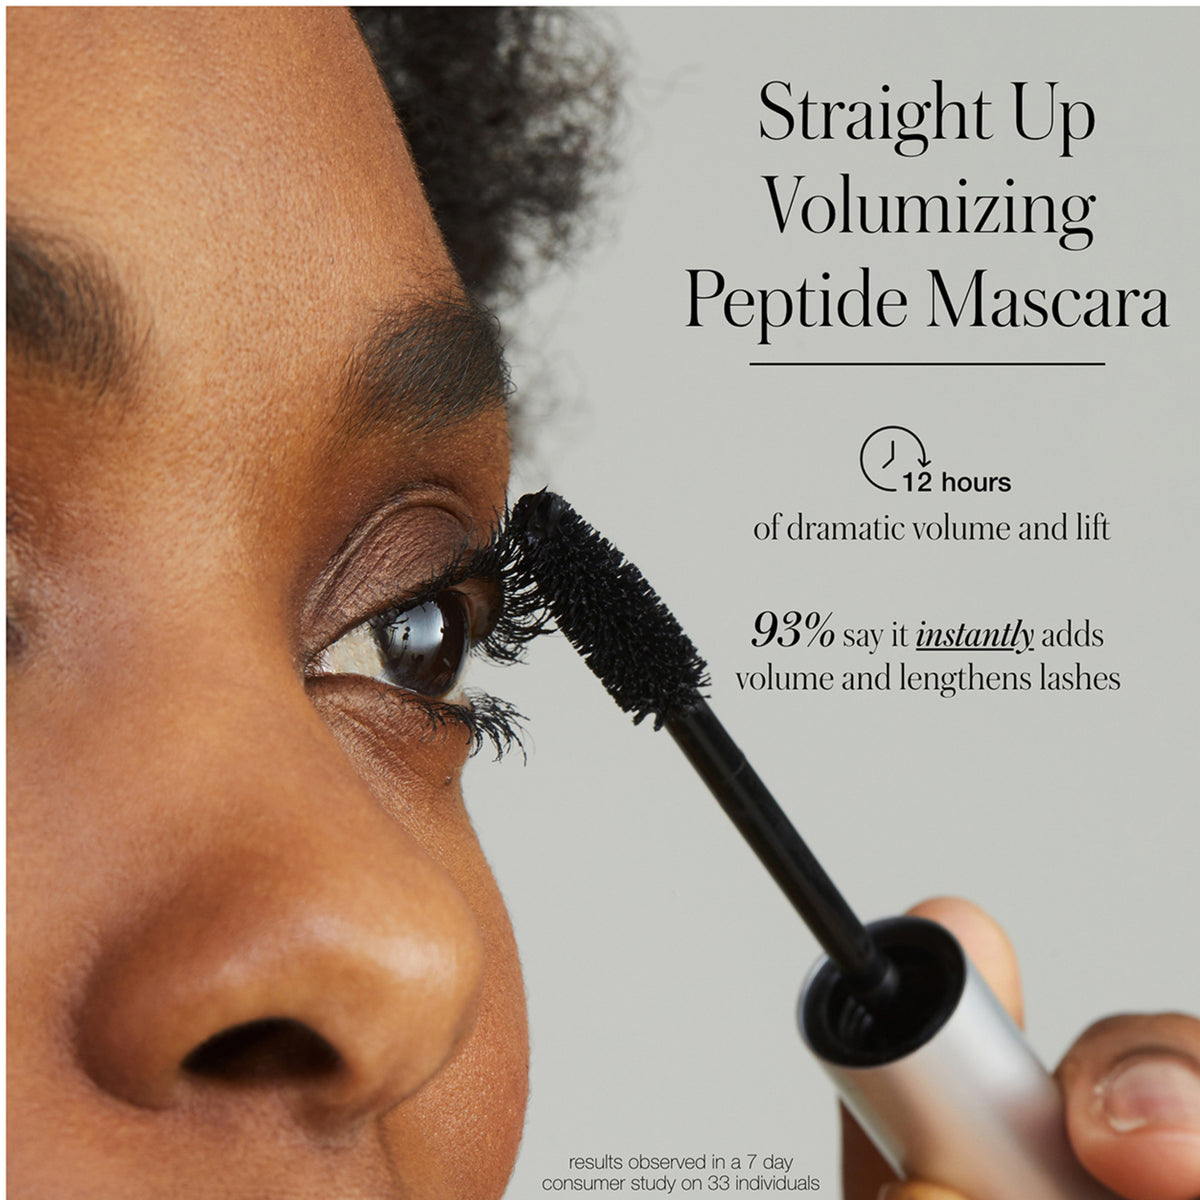 RMS Beauty Straight Up Volumizing Peptide Mascara . This product is in the color black